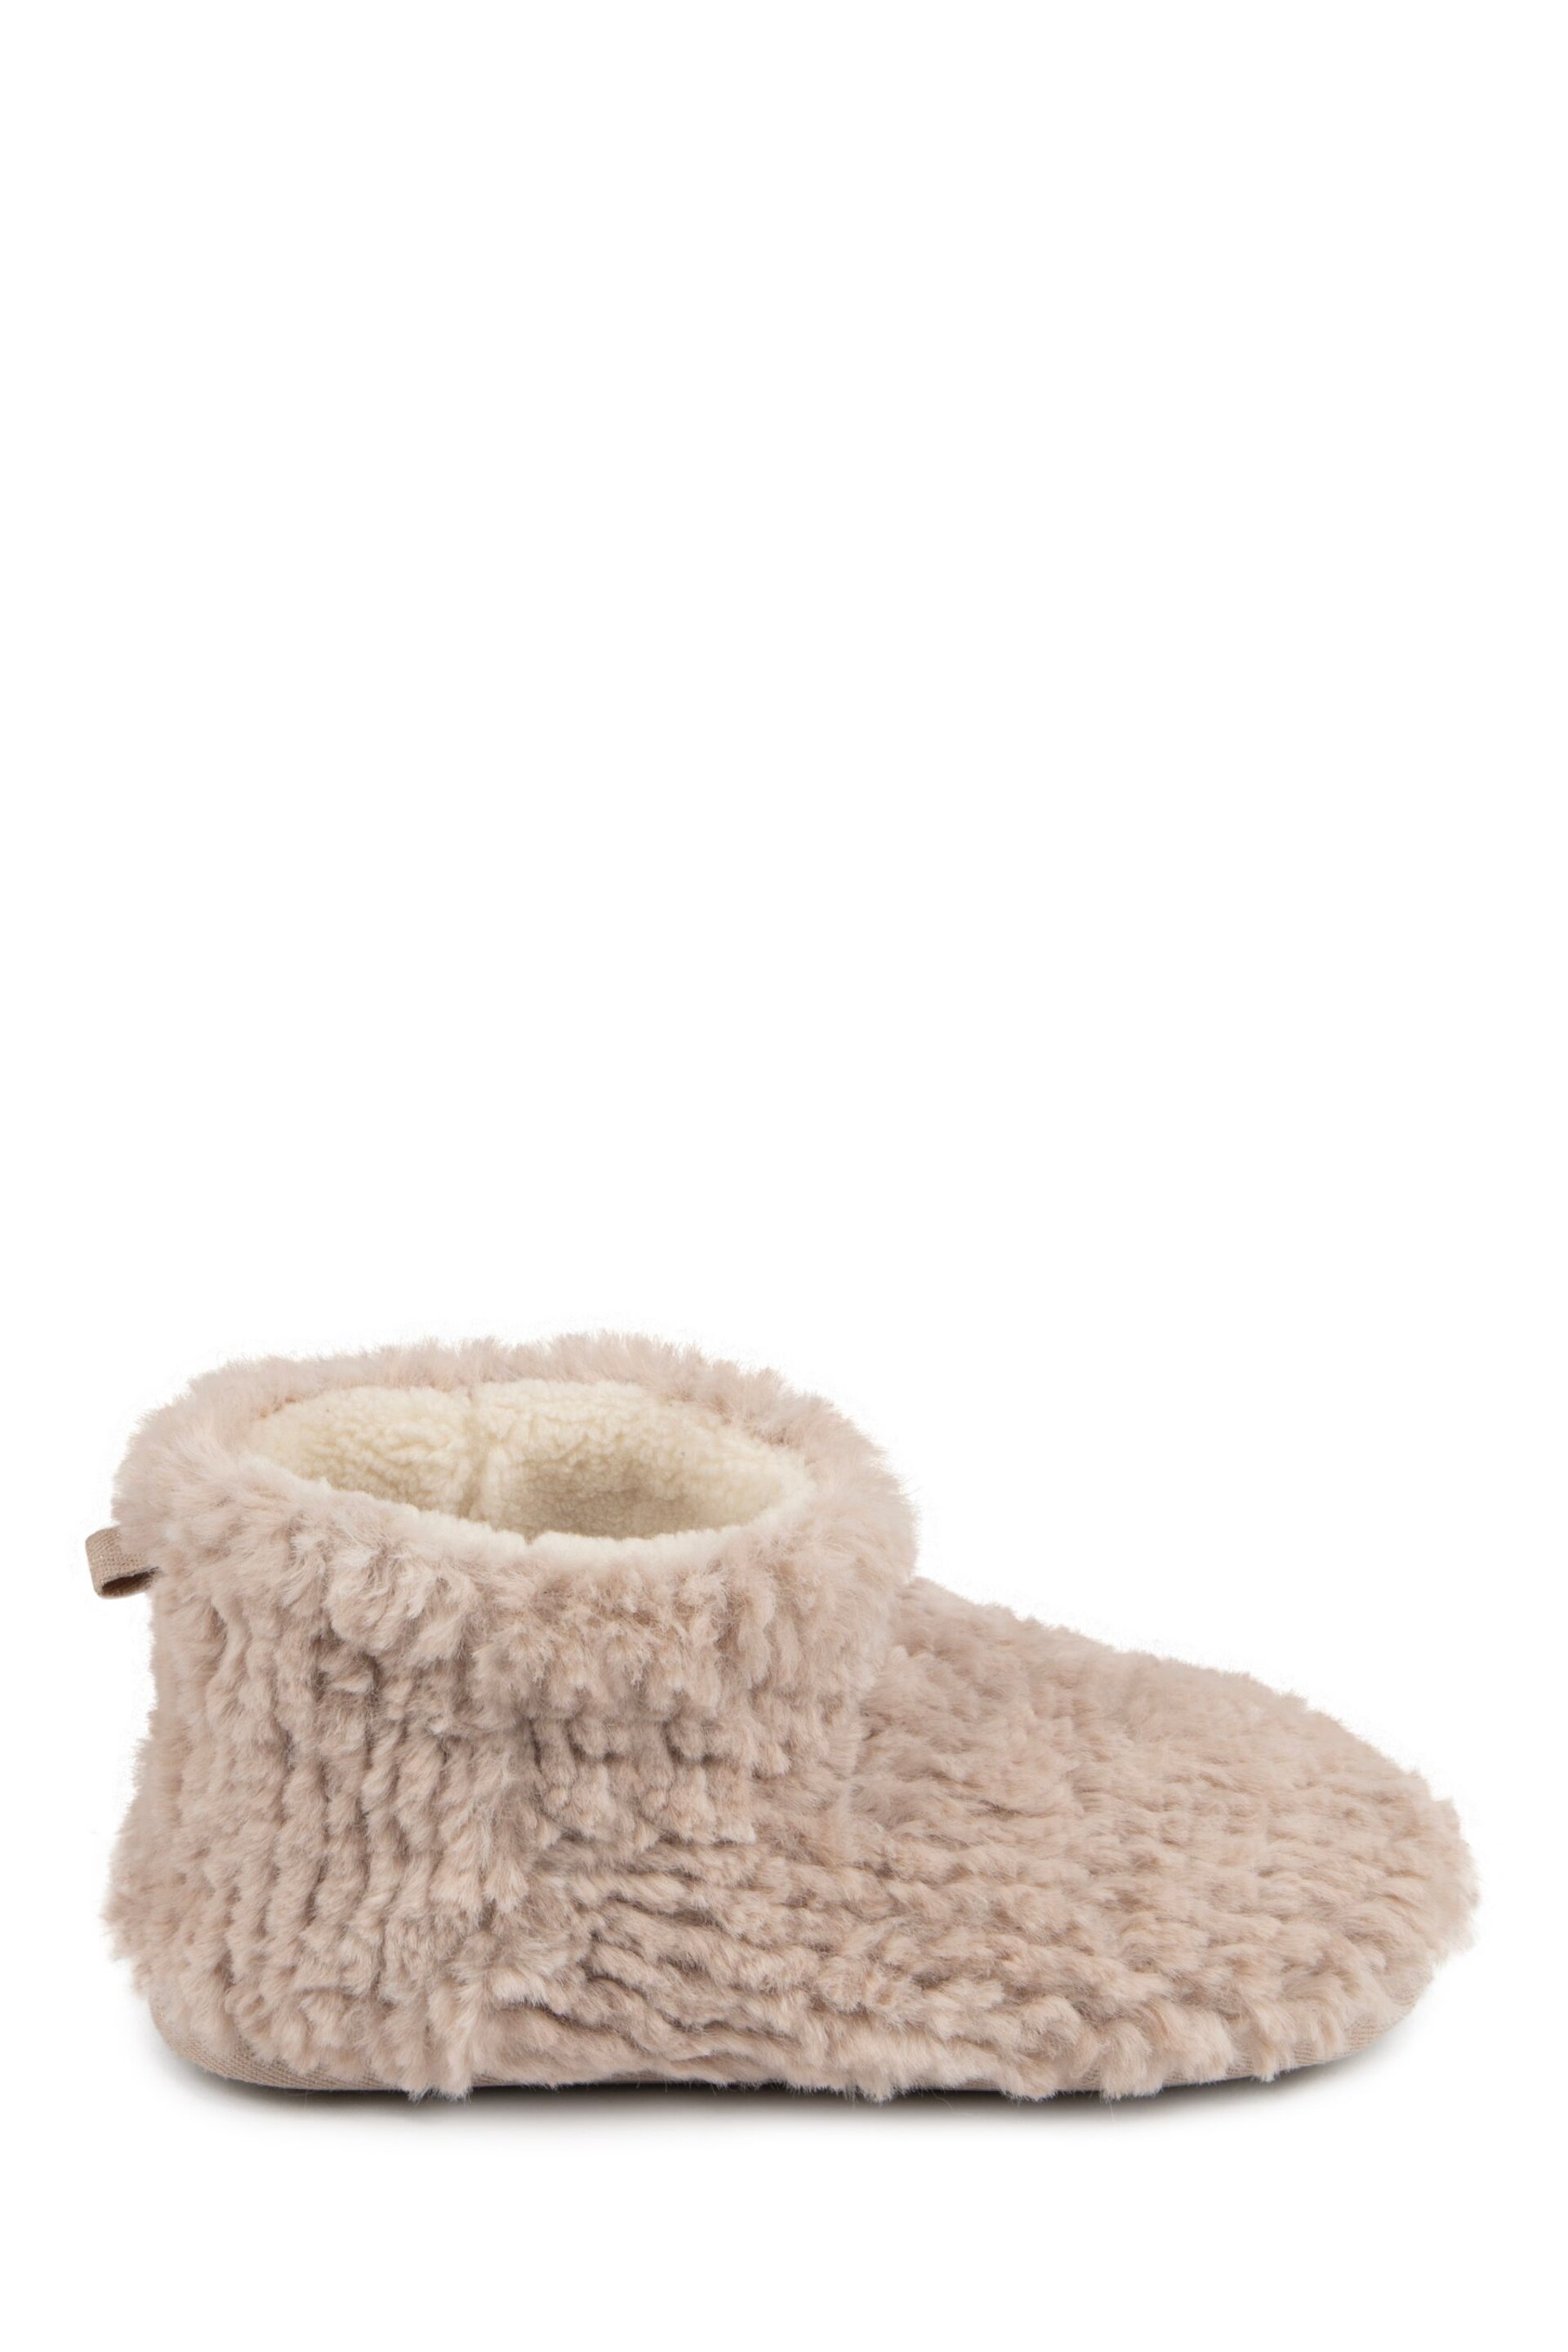 Totes Natural Ladies Faux Fur  Short Boot Slippers - Image 2 of 5